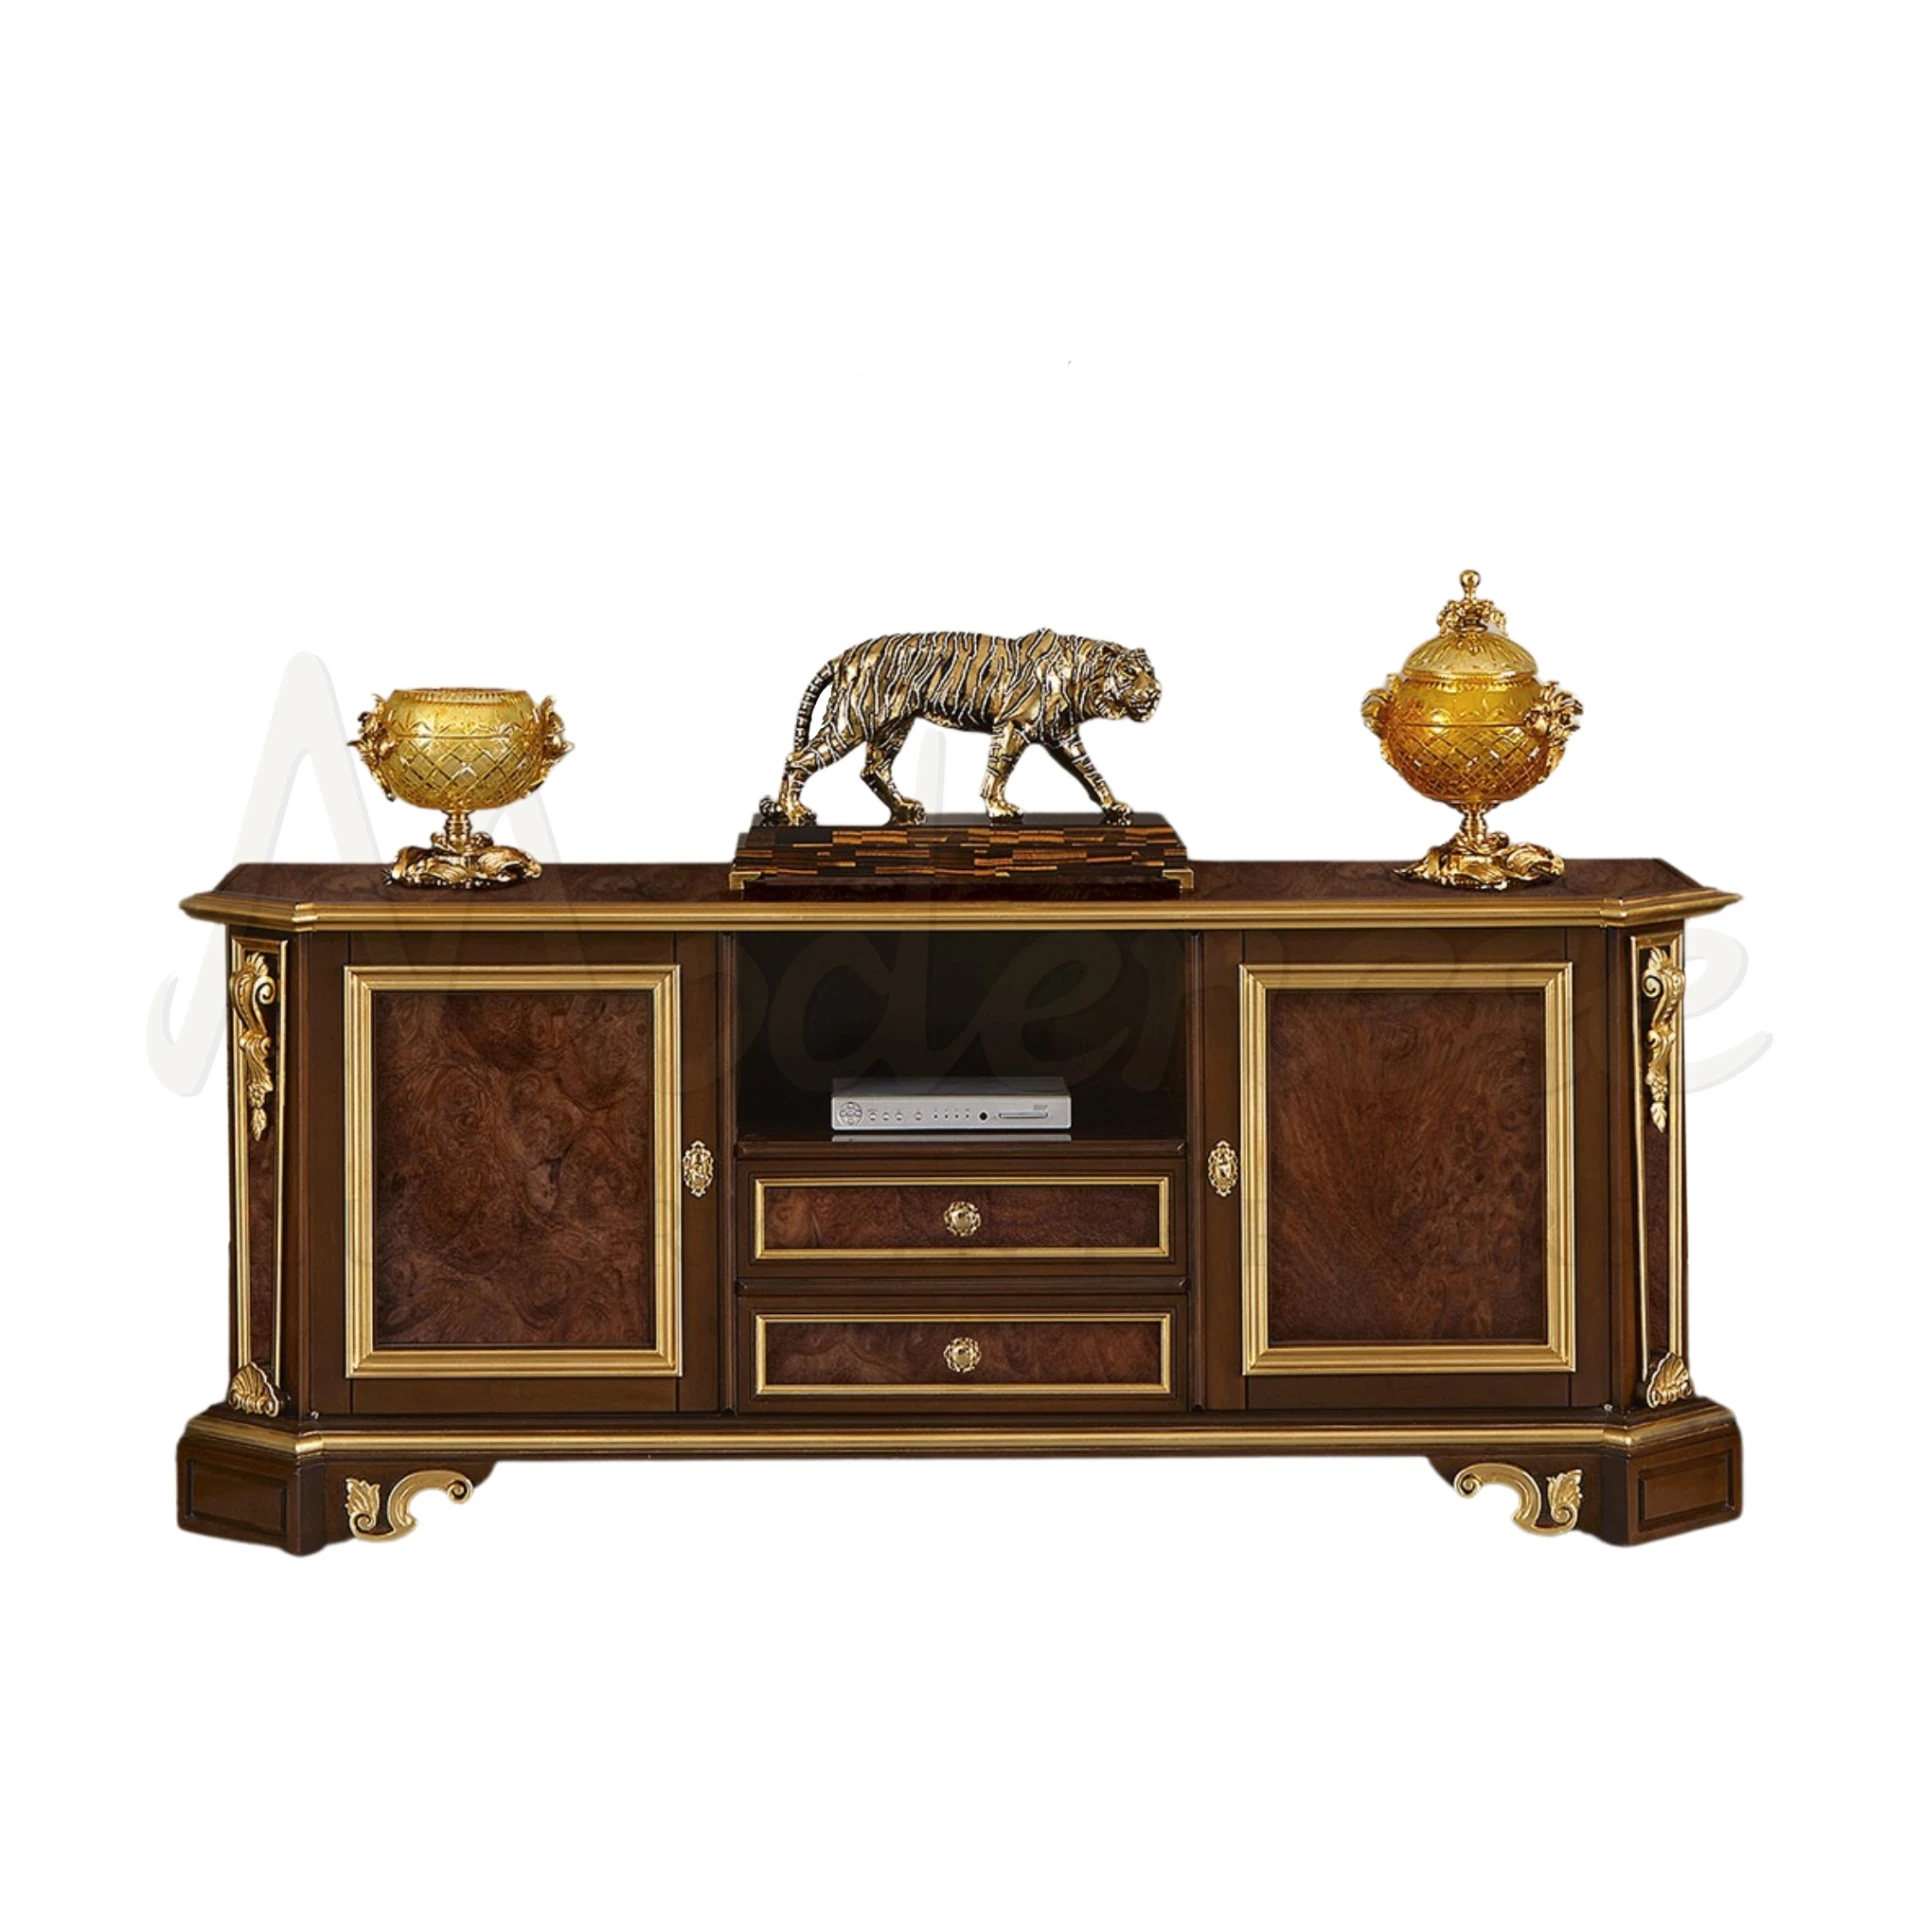 Classic Style TV Stand with gold leaf ornamentation, Italian design for a warm, luxurious living room atmosphere.